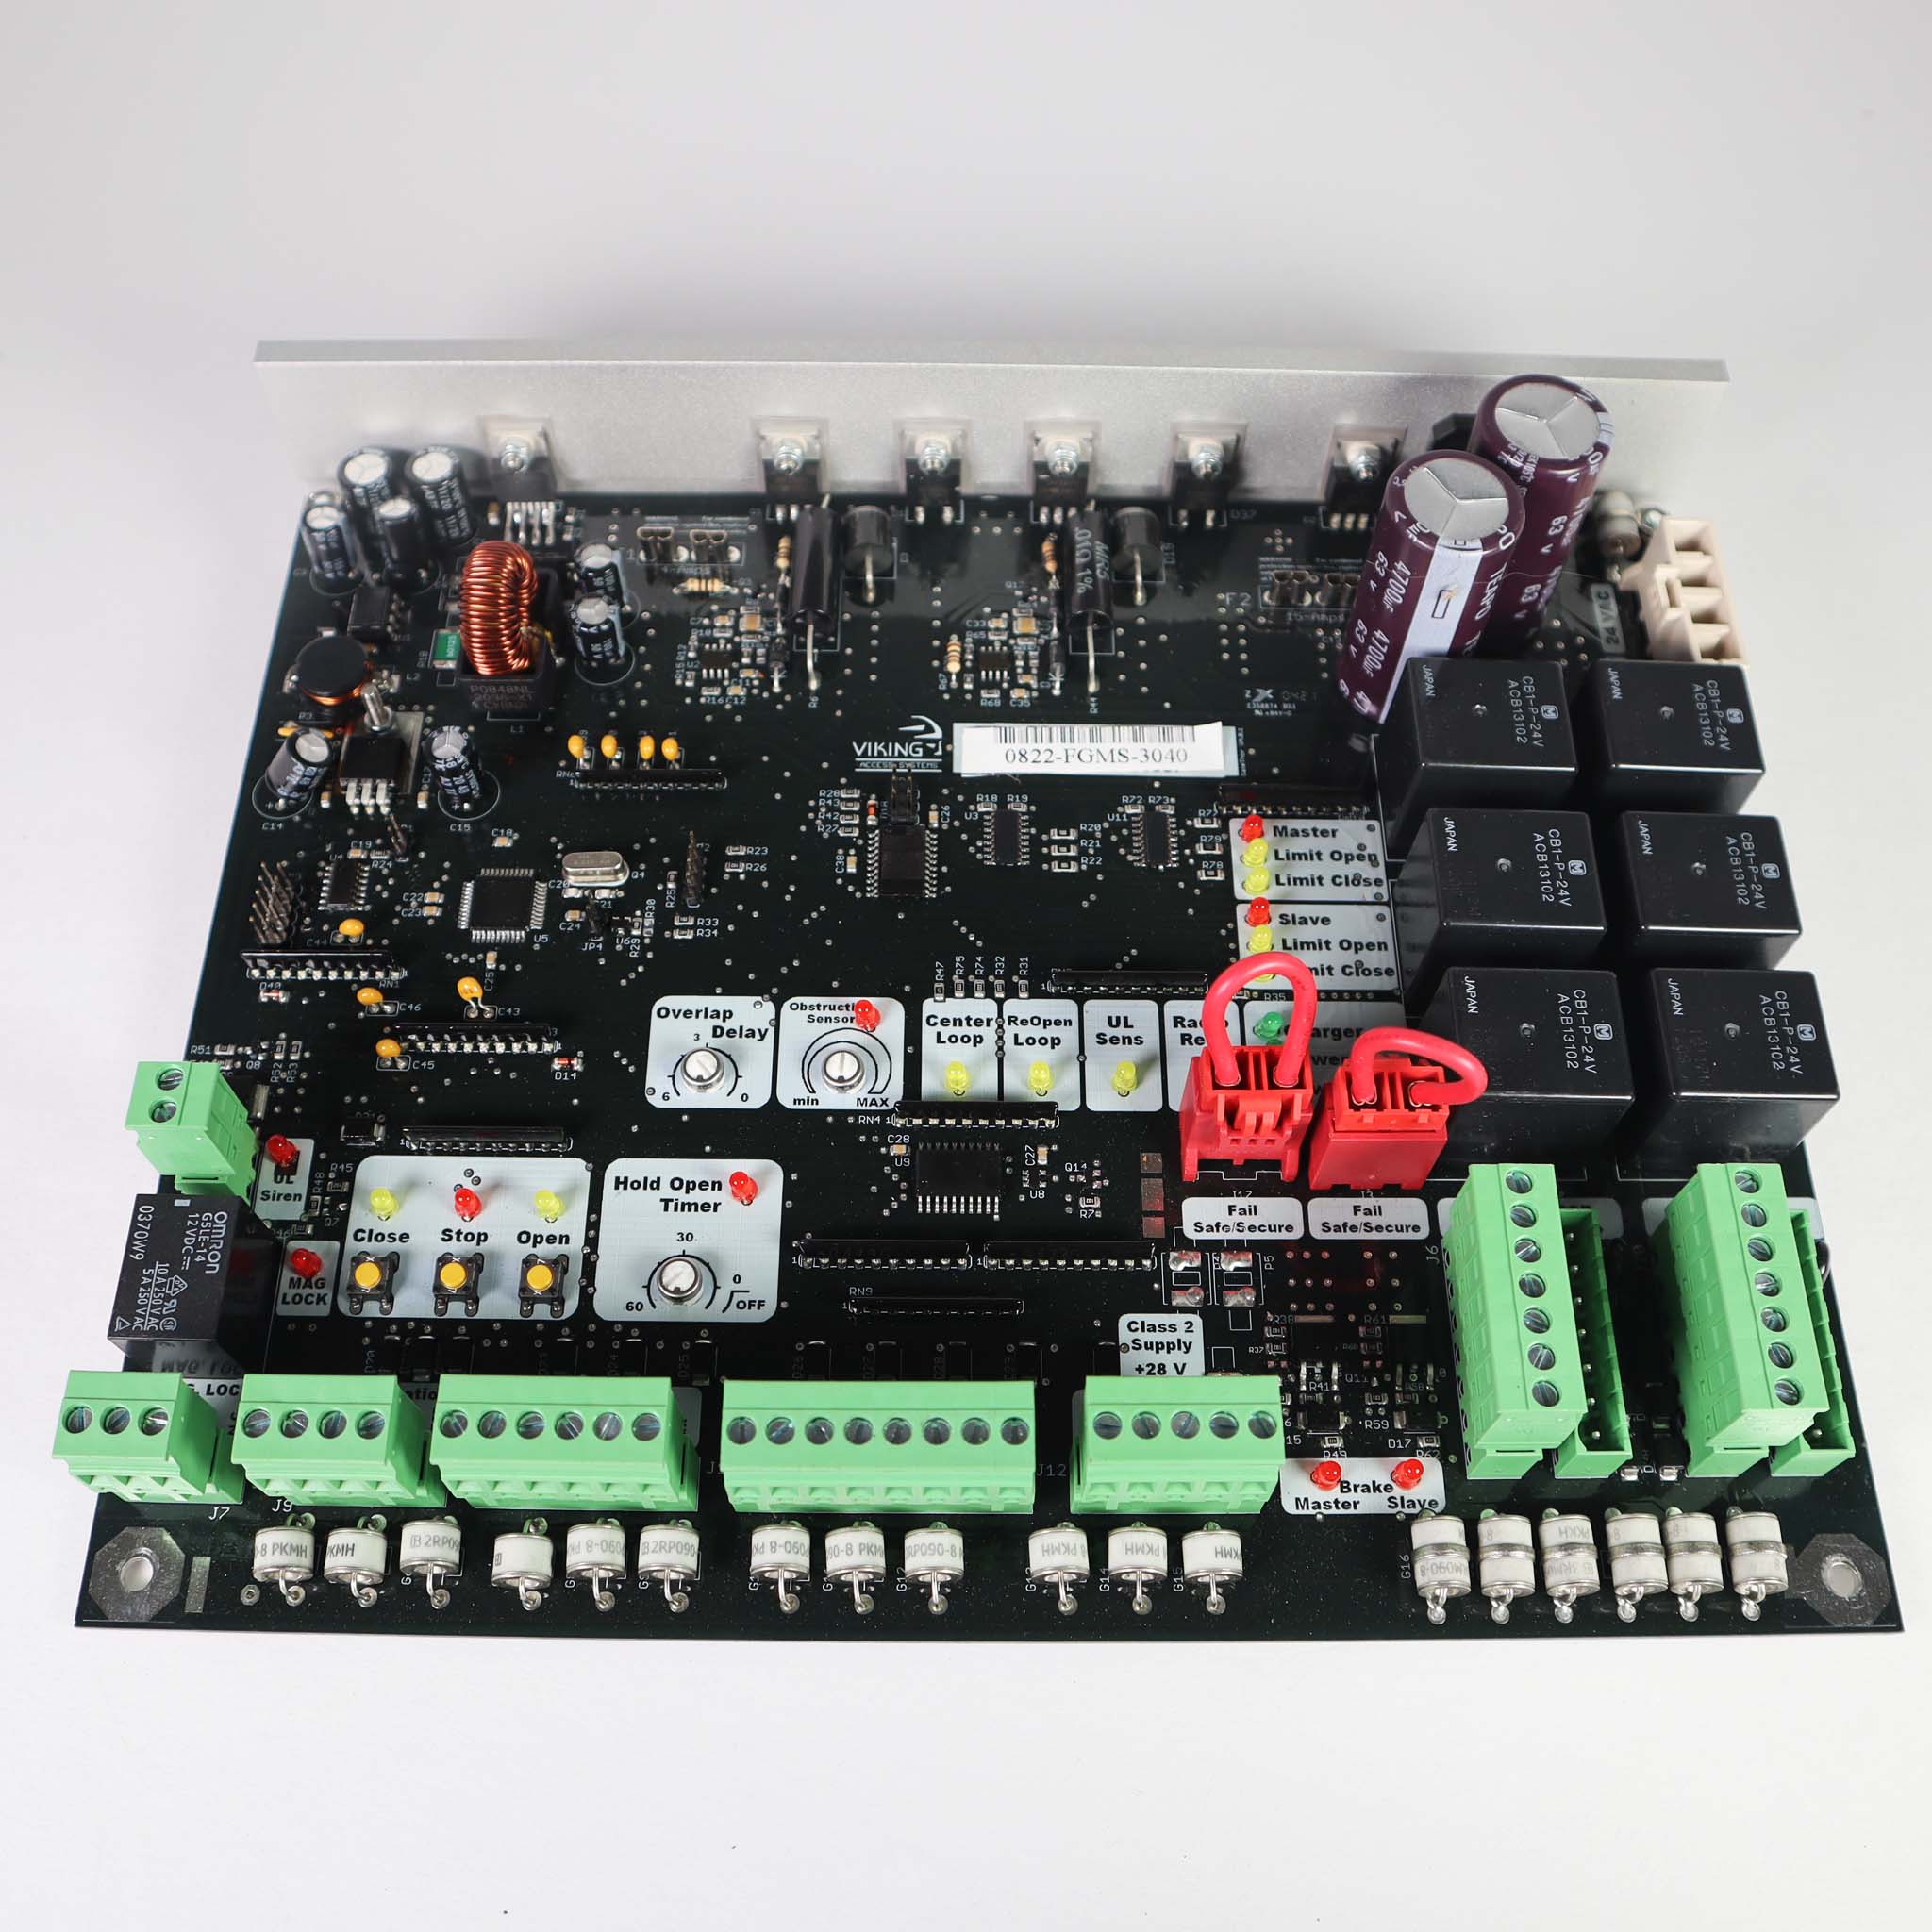 Viking DUMSCB10 Control Board - Primary/Secondary Dual Gates